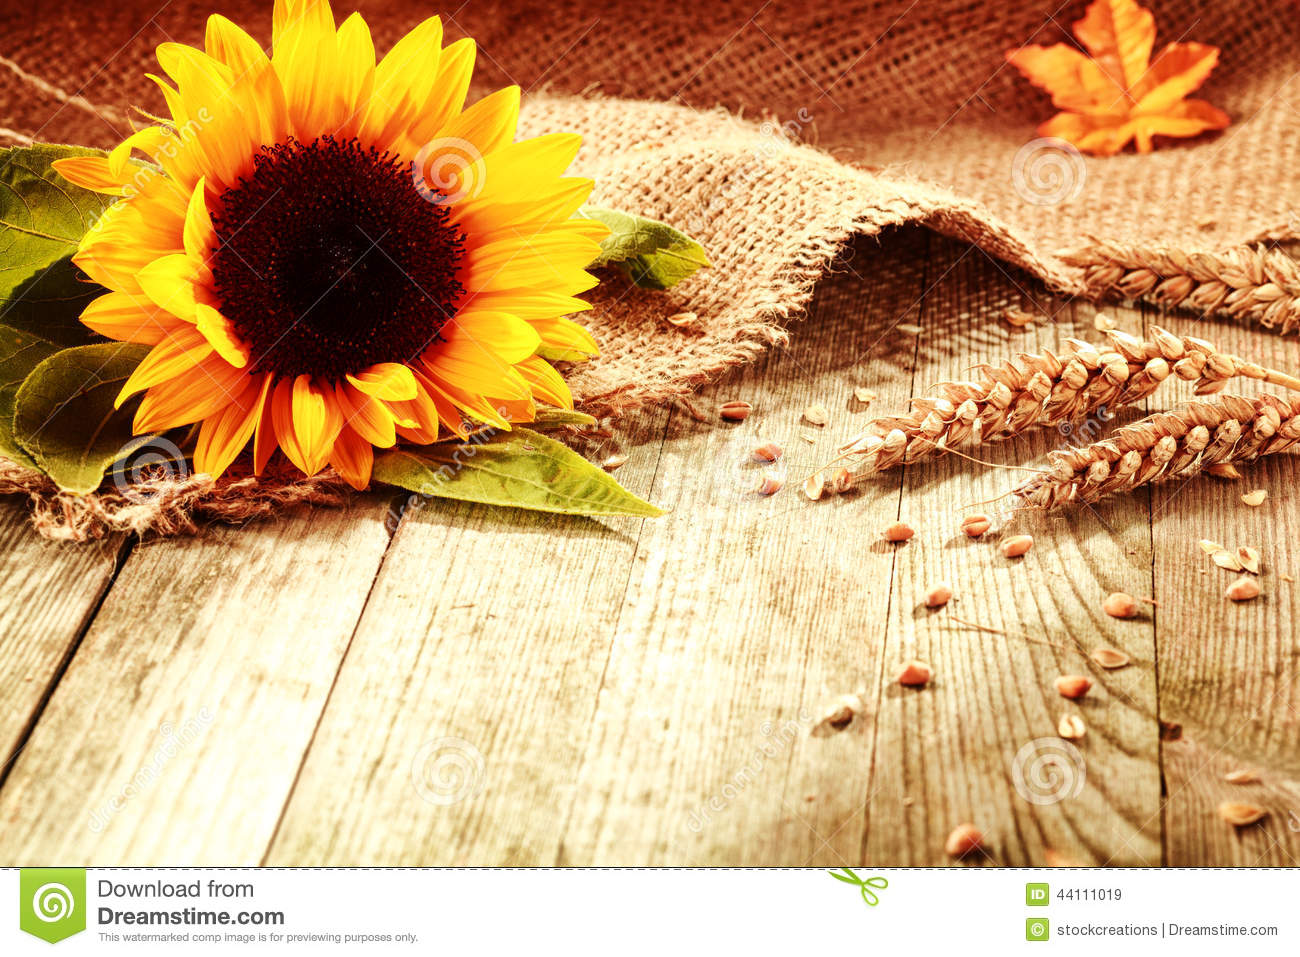 Rustic Background With A Bright Colorful Yellow Sunflower And Ripe